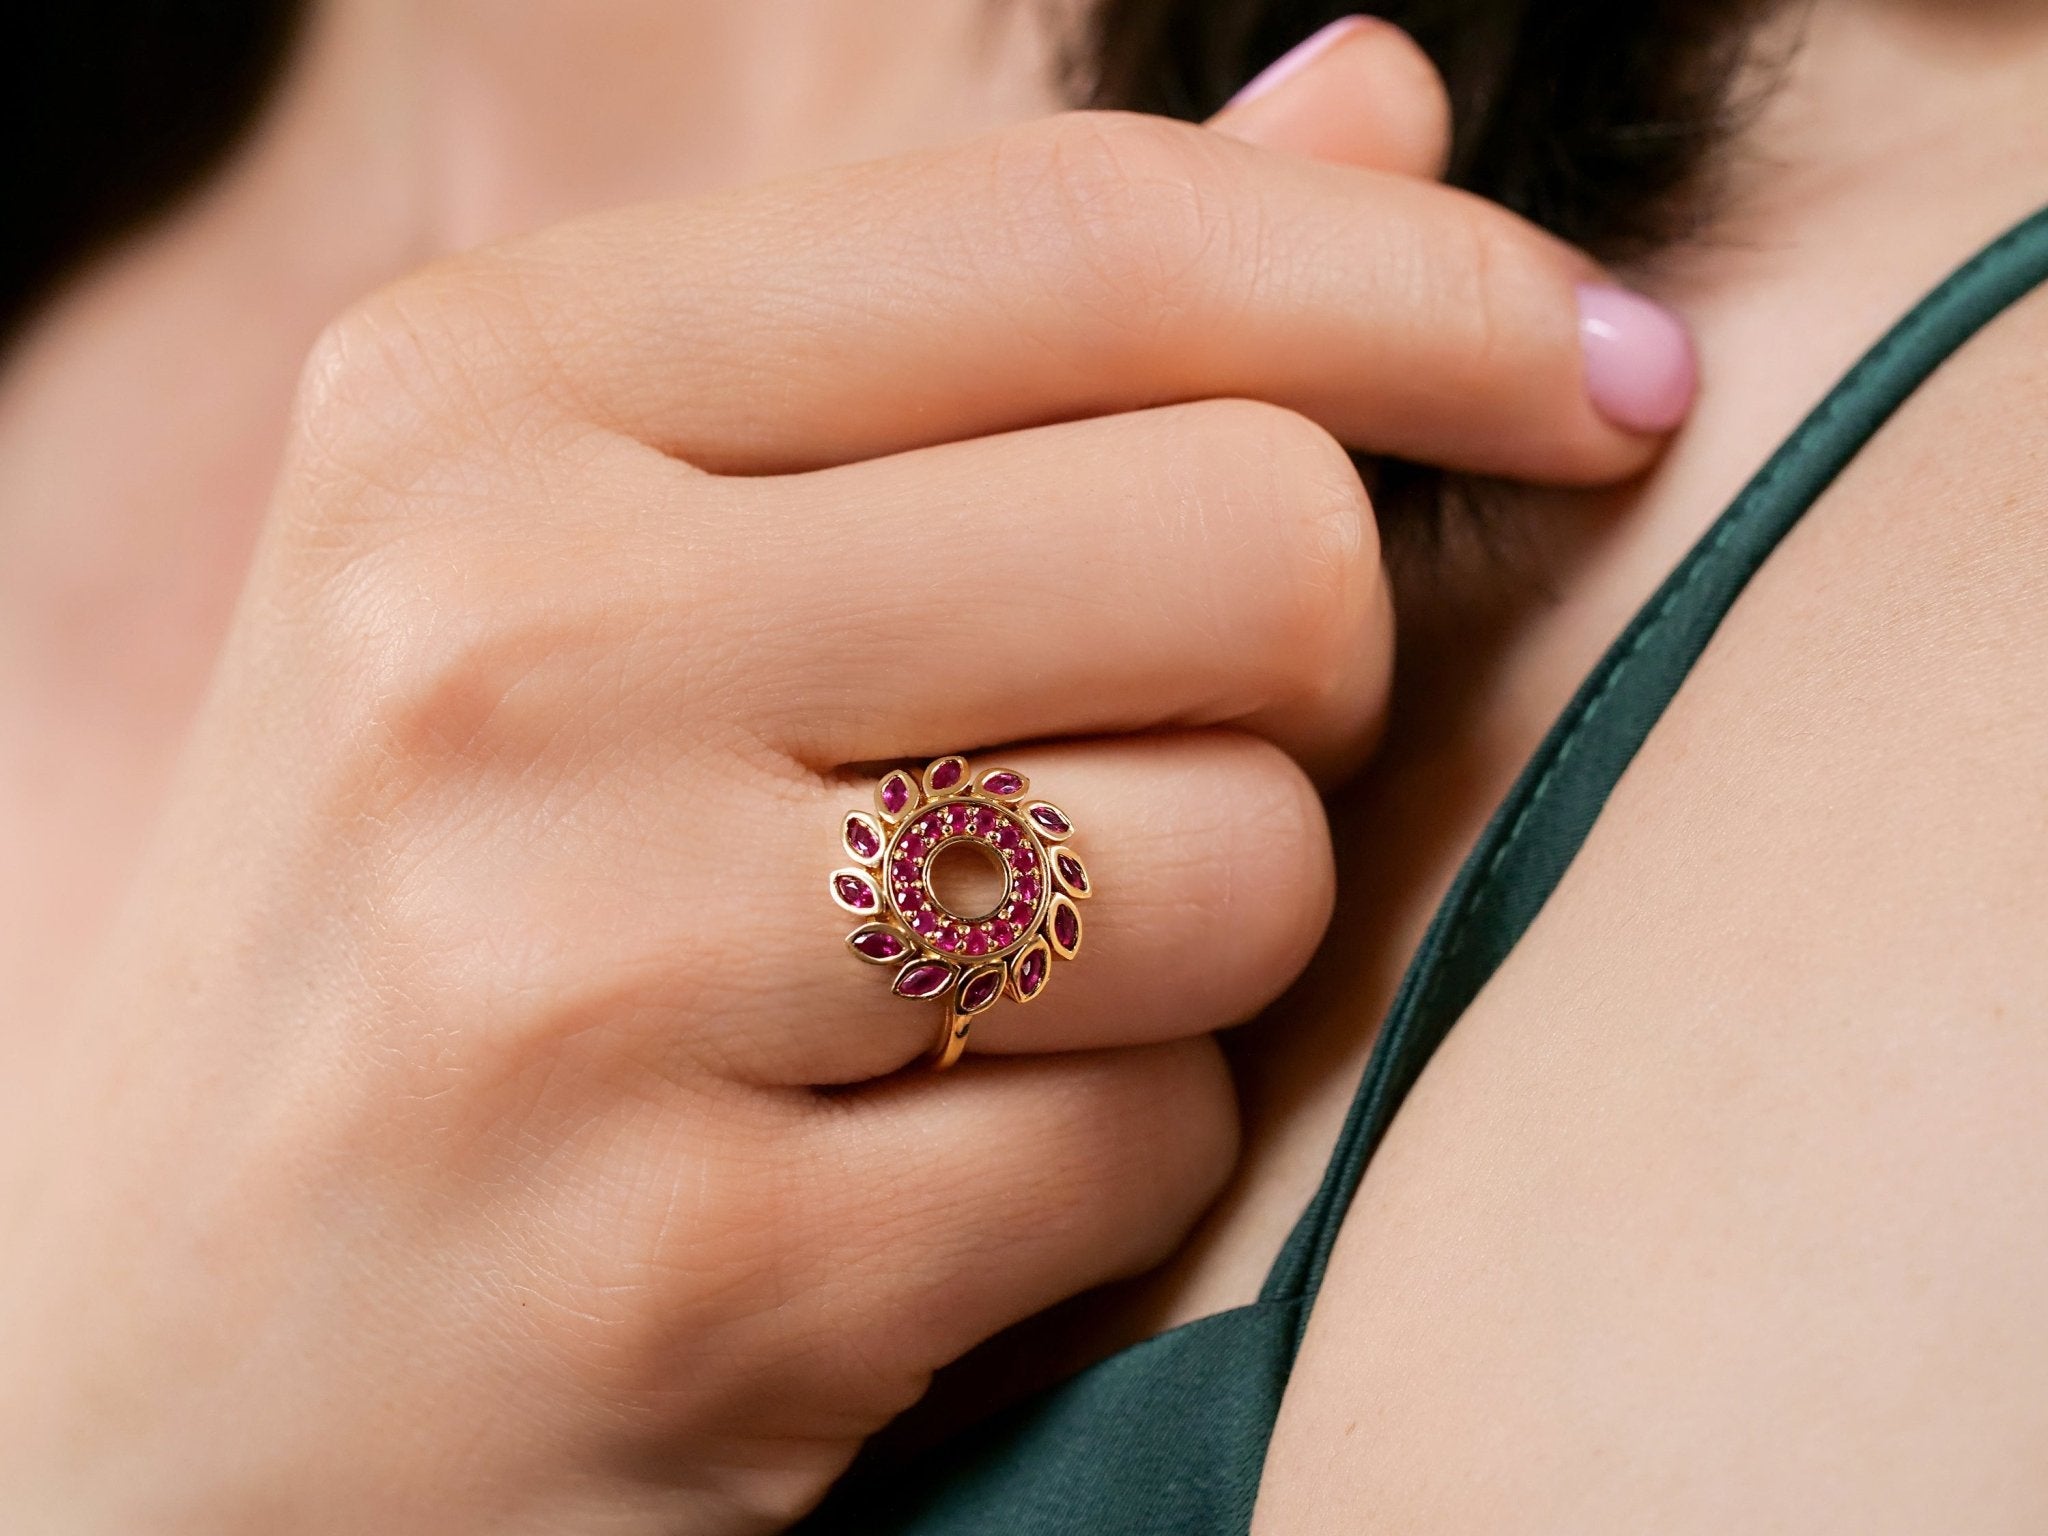 Flavia - Ruby Flower Halo Ring – La Fleur Rouge Collection of Rubies & Solid Gold - Aurora Laffite Jewelry